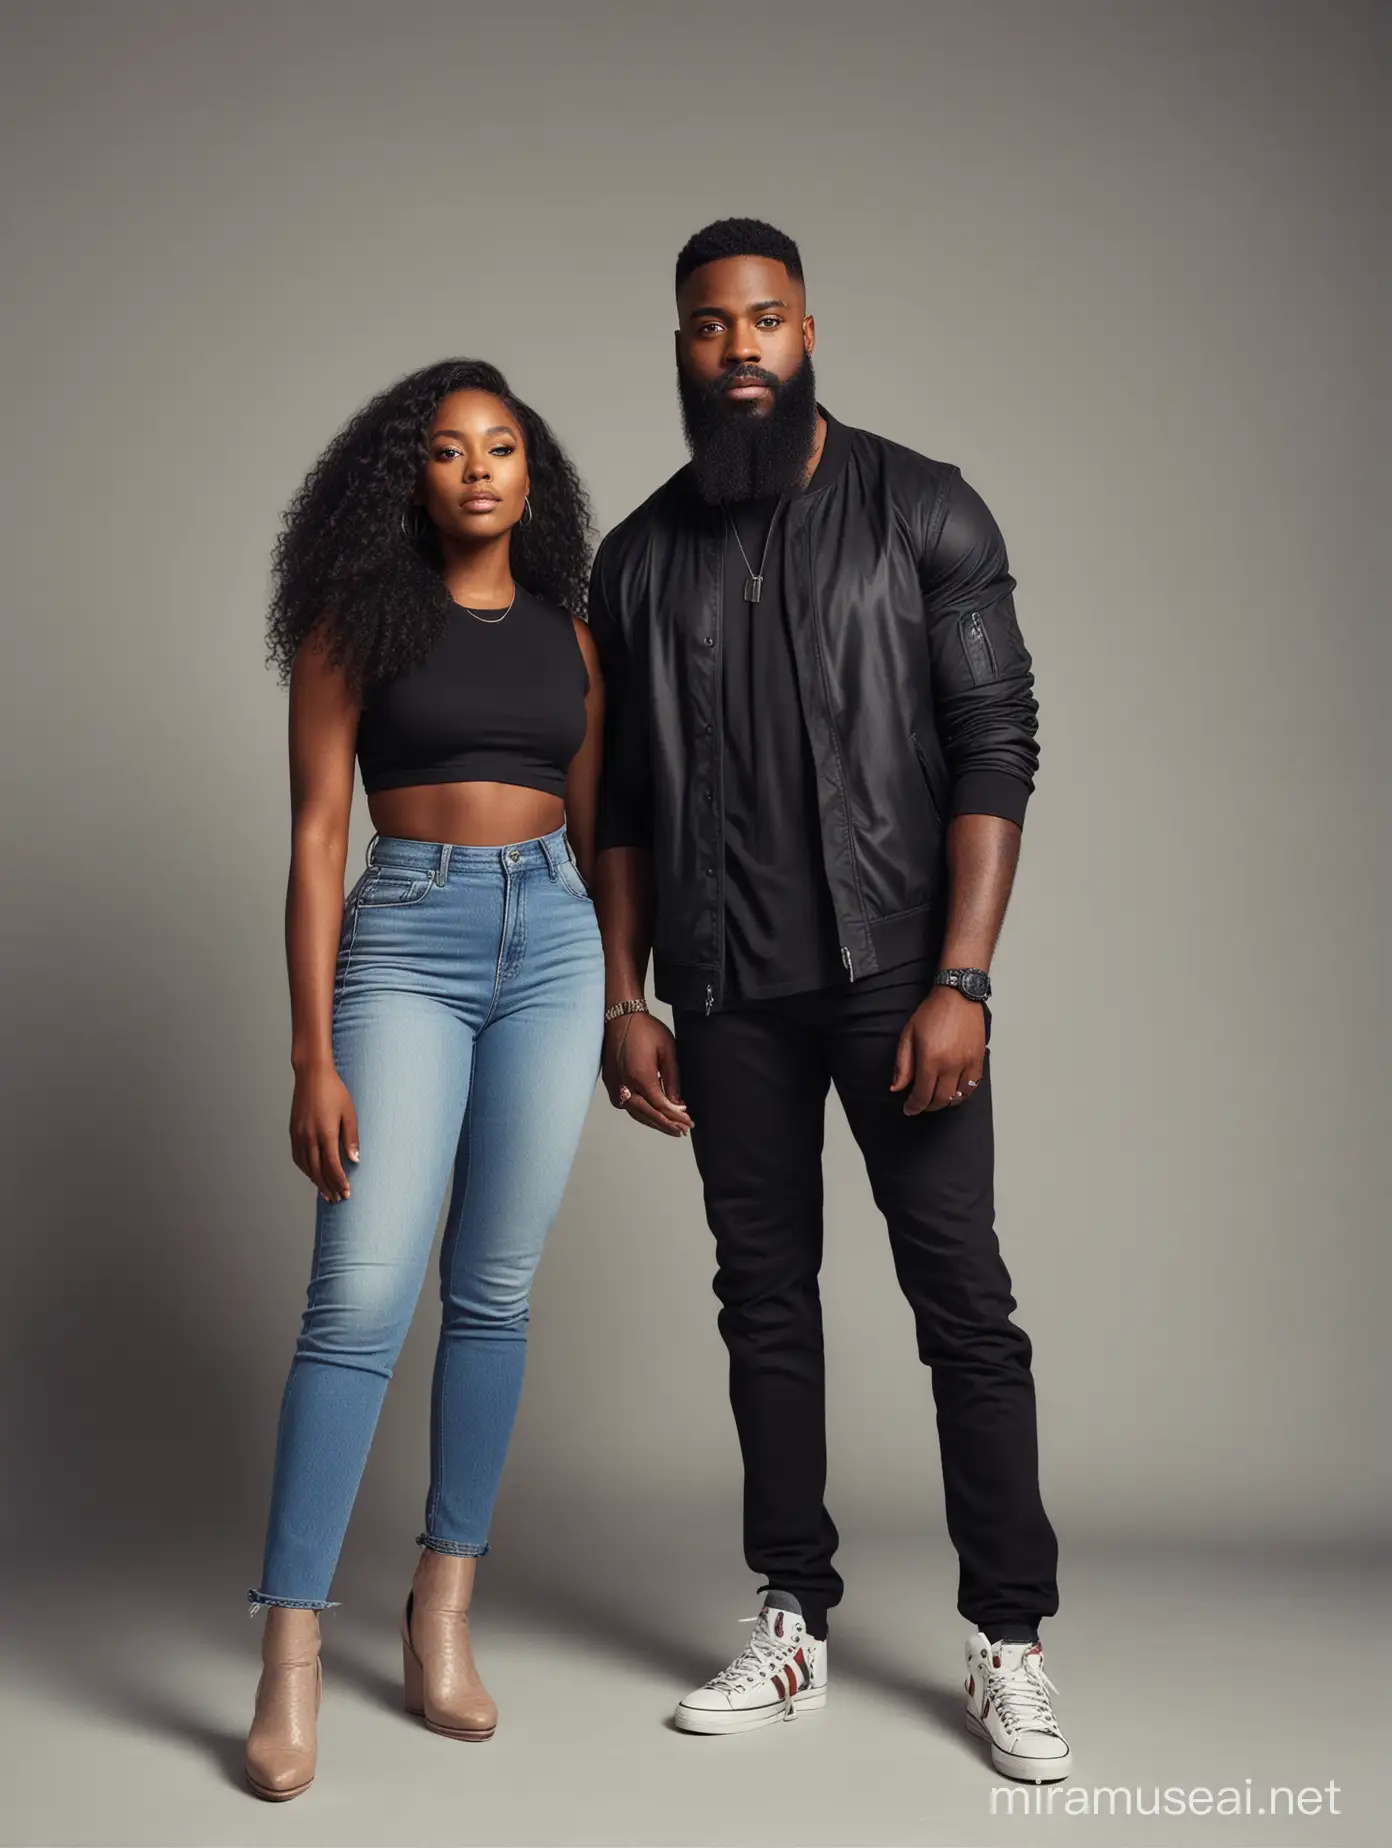 Front facing, full body image of bearded black man standing next to a black woman with long hair wearing stylish, trendy, outfits. 